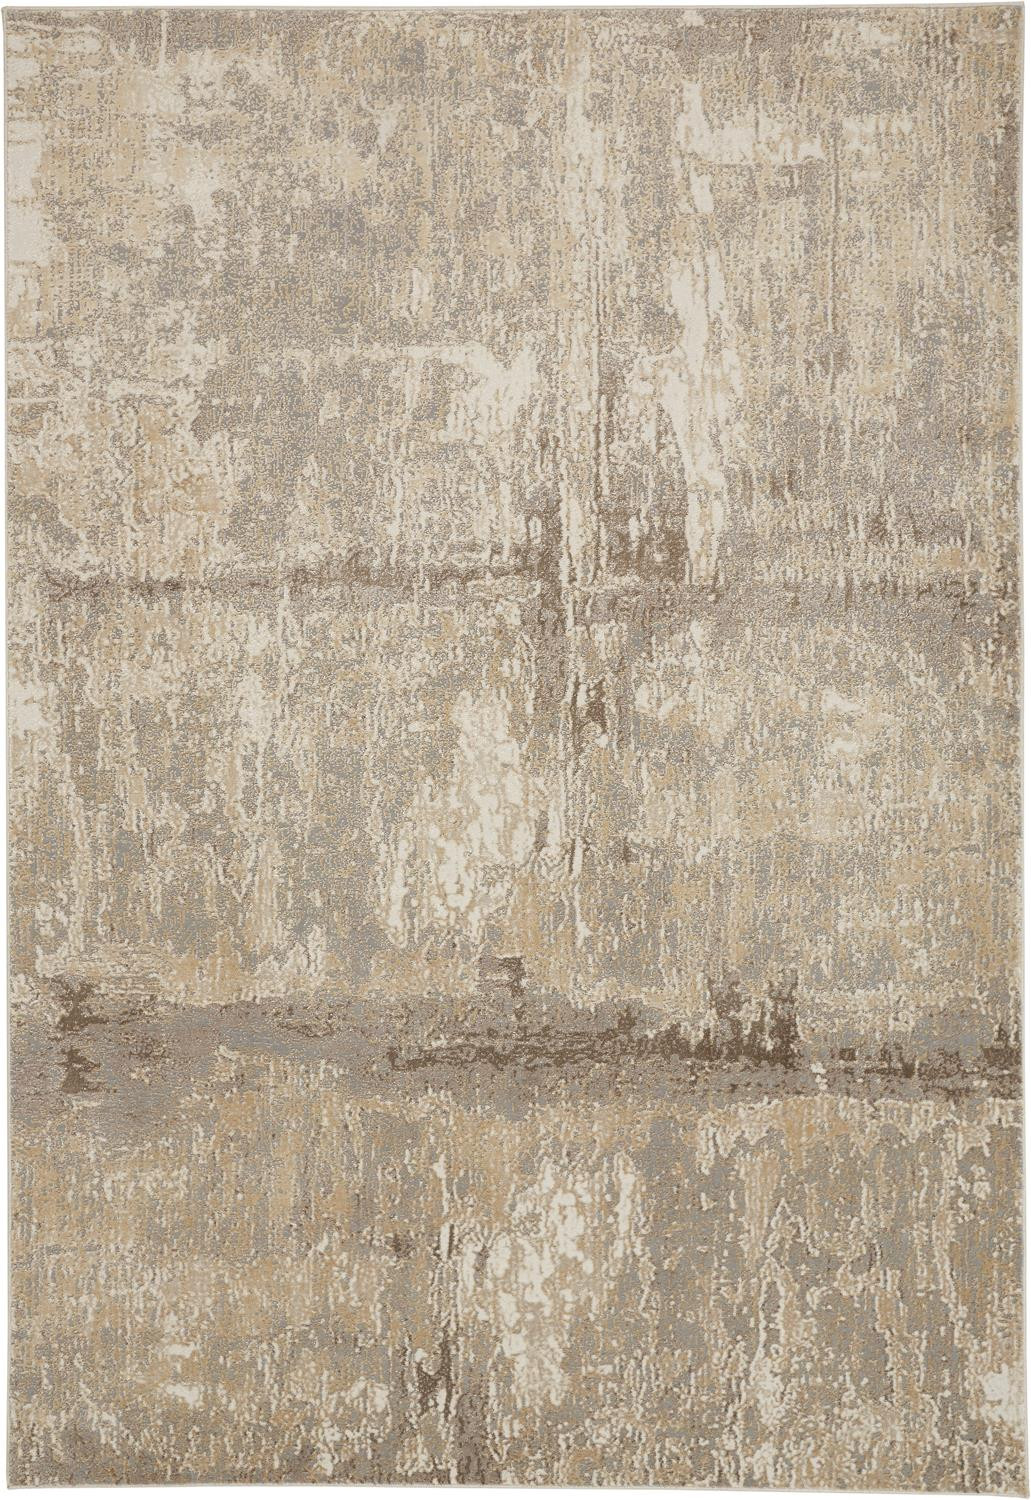 12' X 15' Tan Ivory And Brown Abstract Area Rug-514693-1